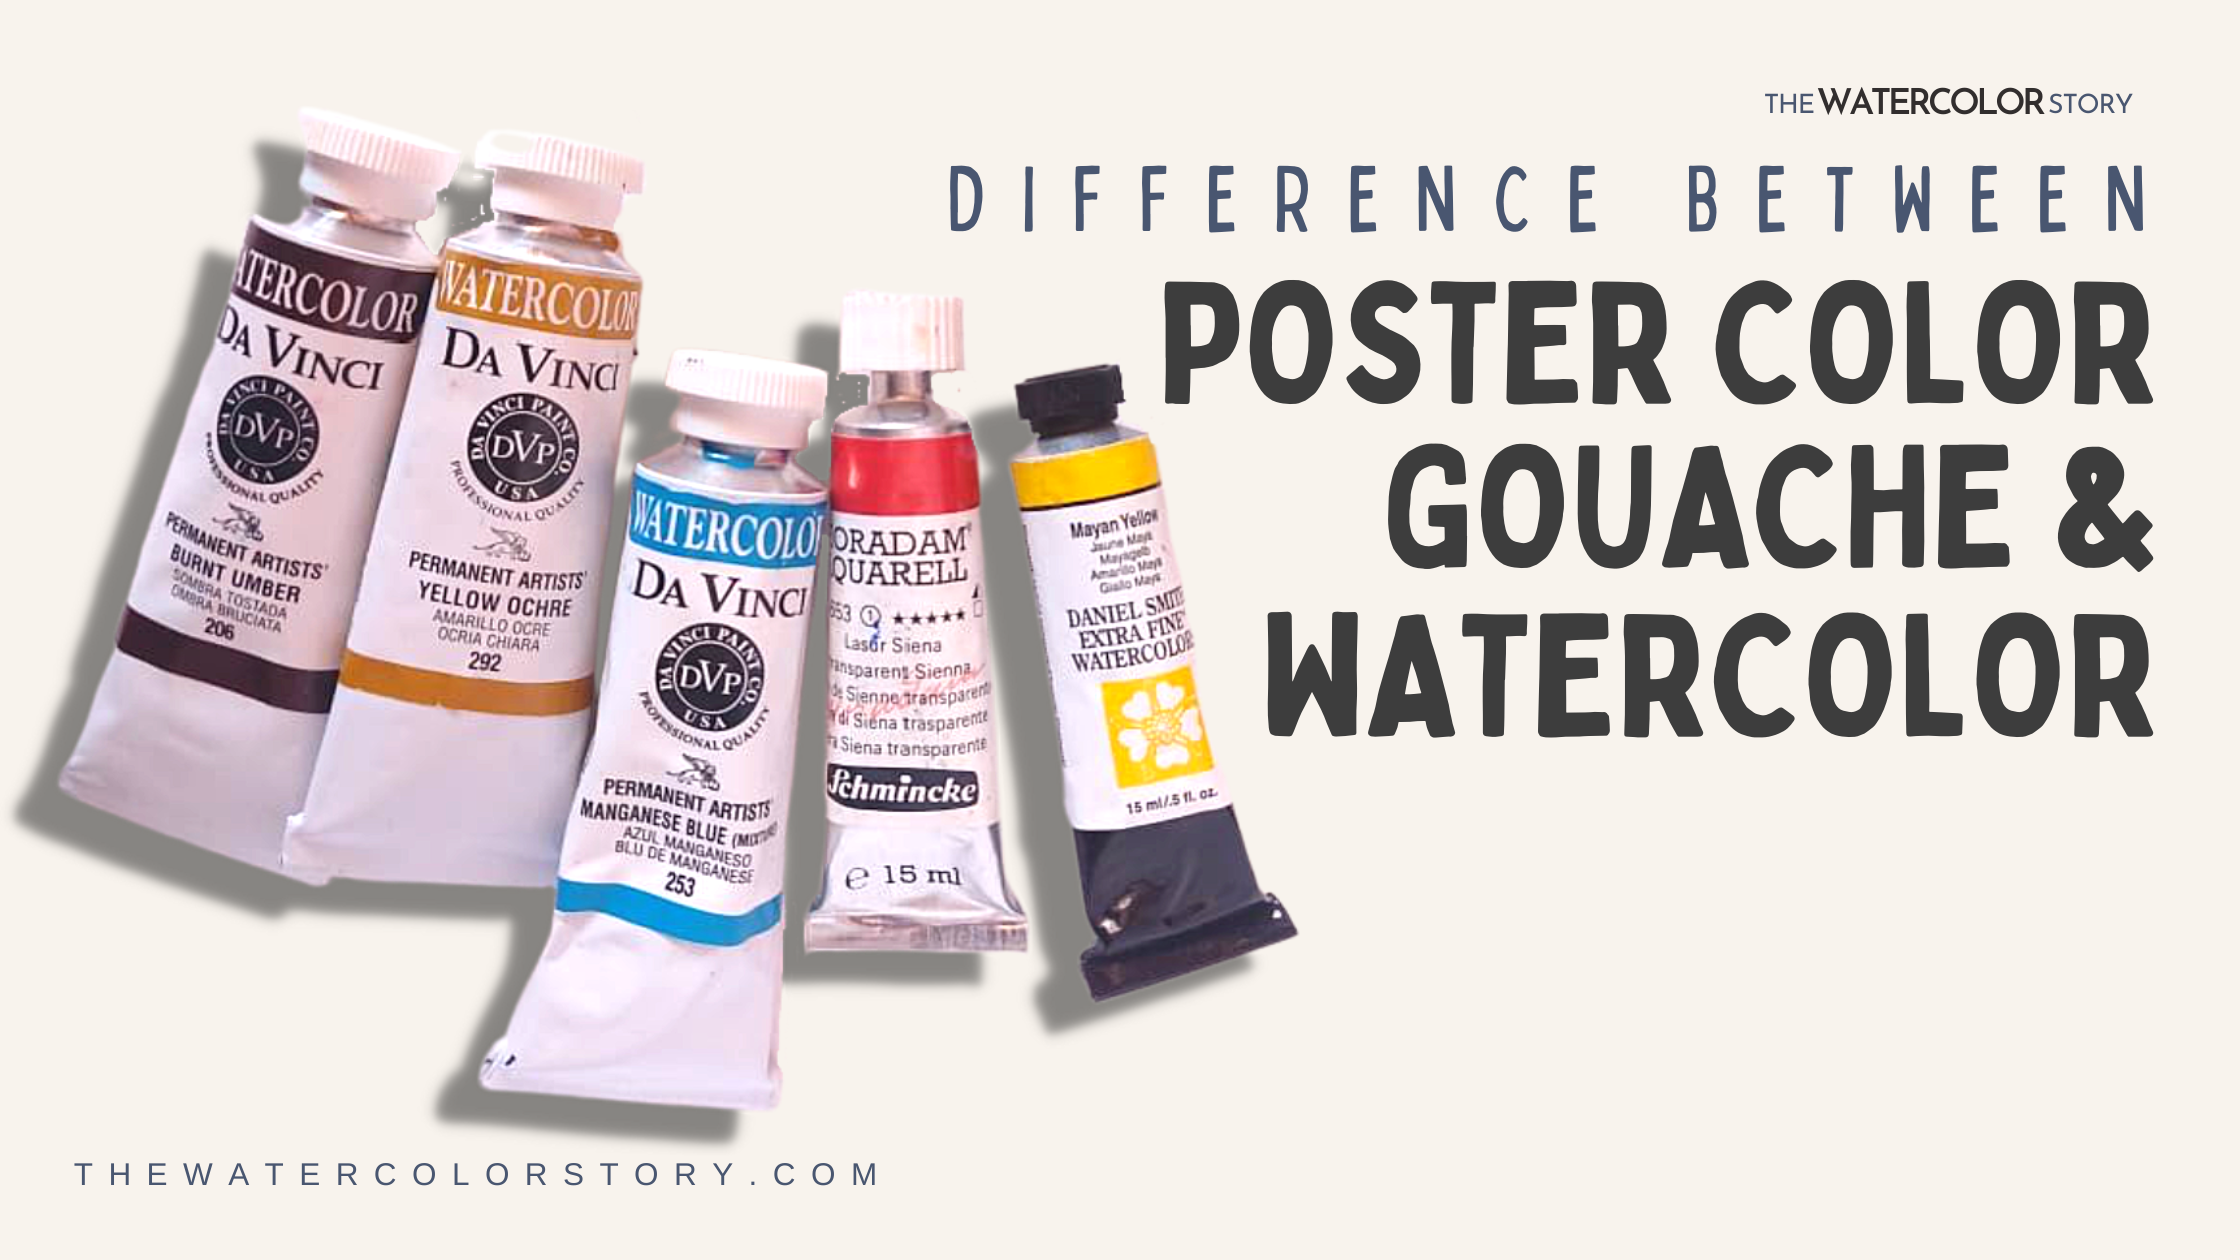 Difference between poster color, gouache & watercolor